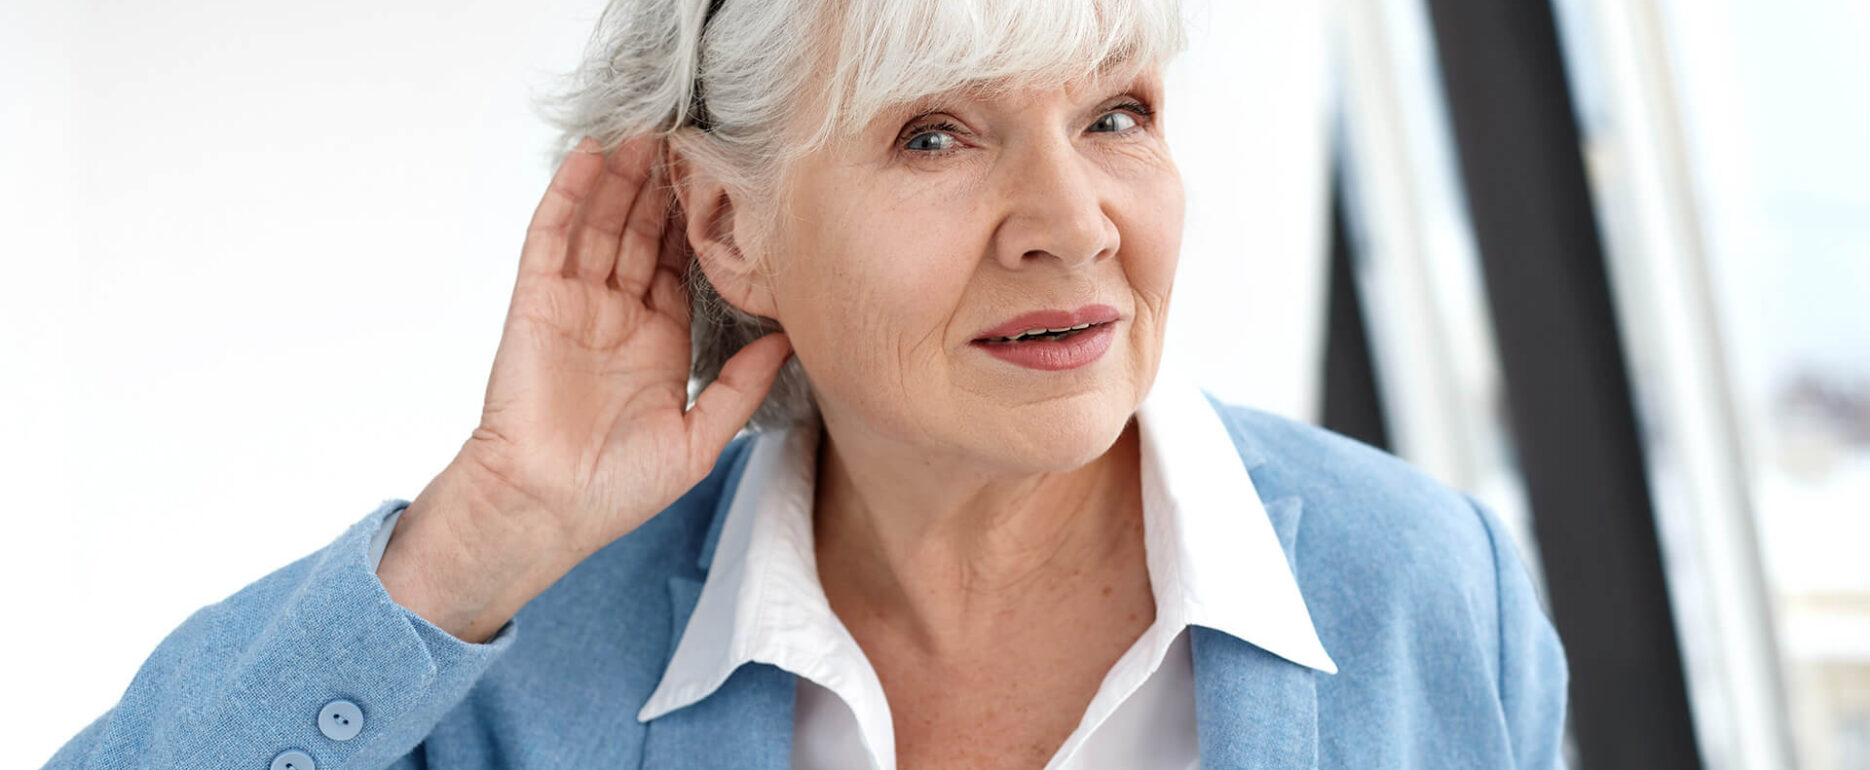 Which Type of Hearing Loss Is Most Common in US?